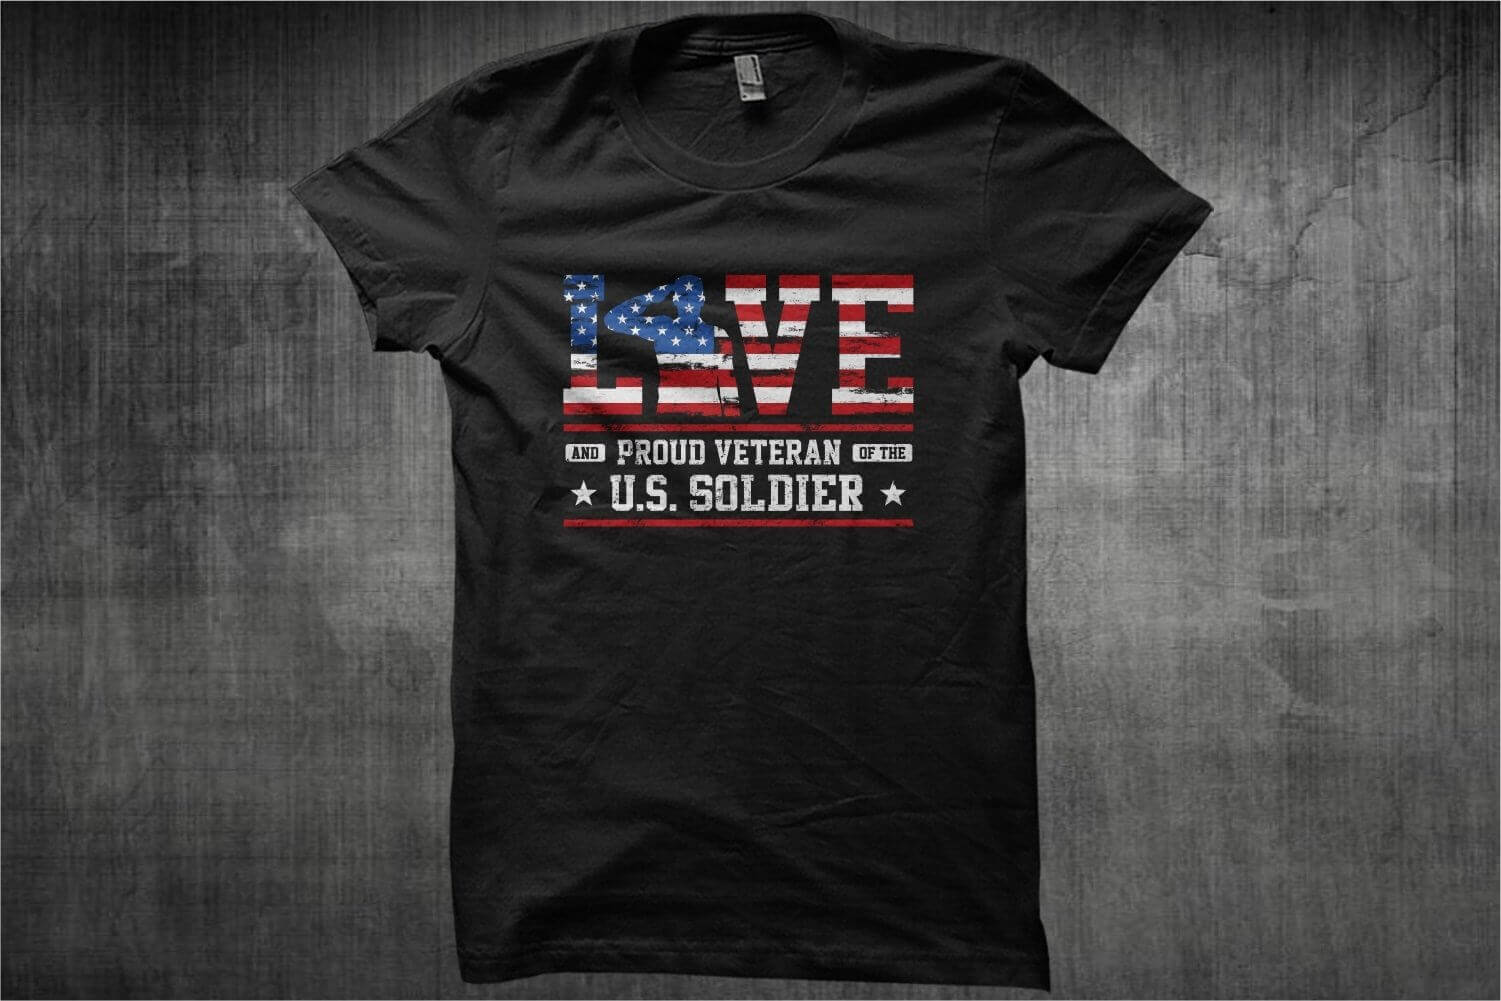 Black T-shirt with slogan "Love and proud veteran of the U.S. soldier".